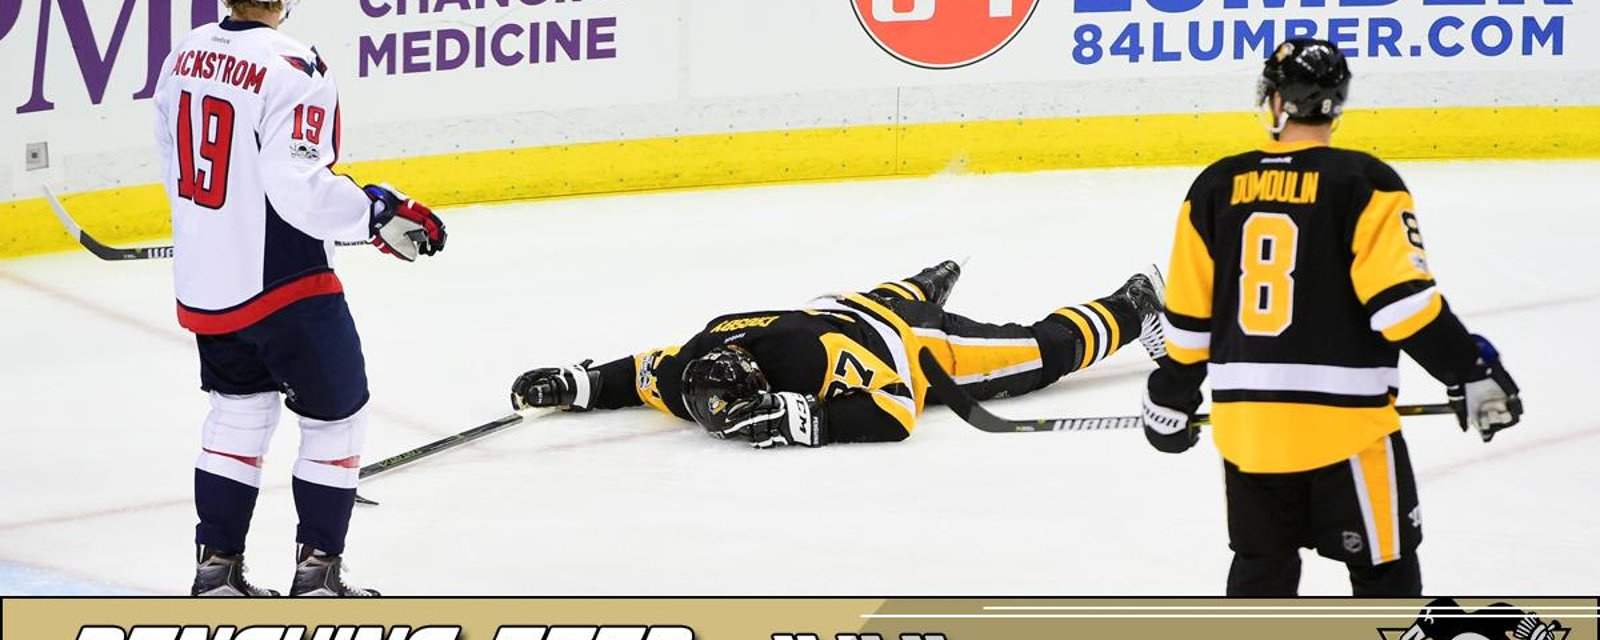 NHL GM reacts emotionally to Crosby's concussion. 